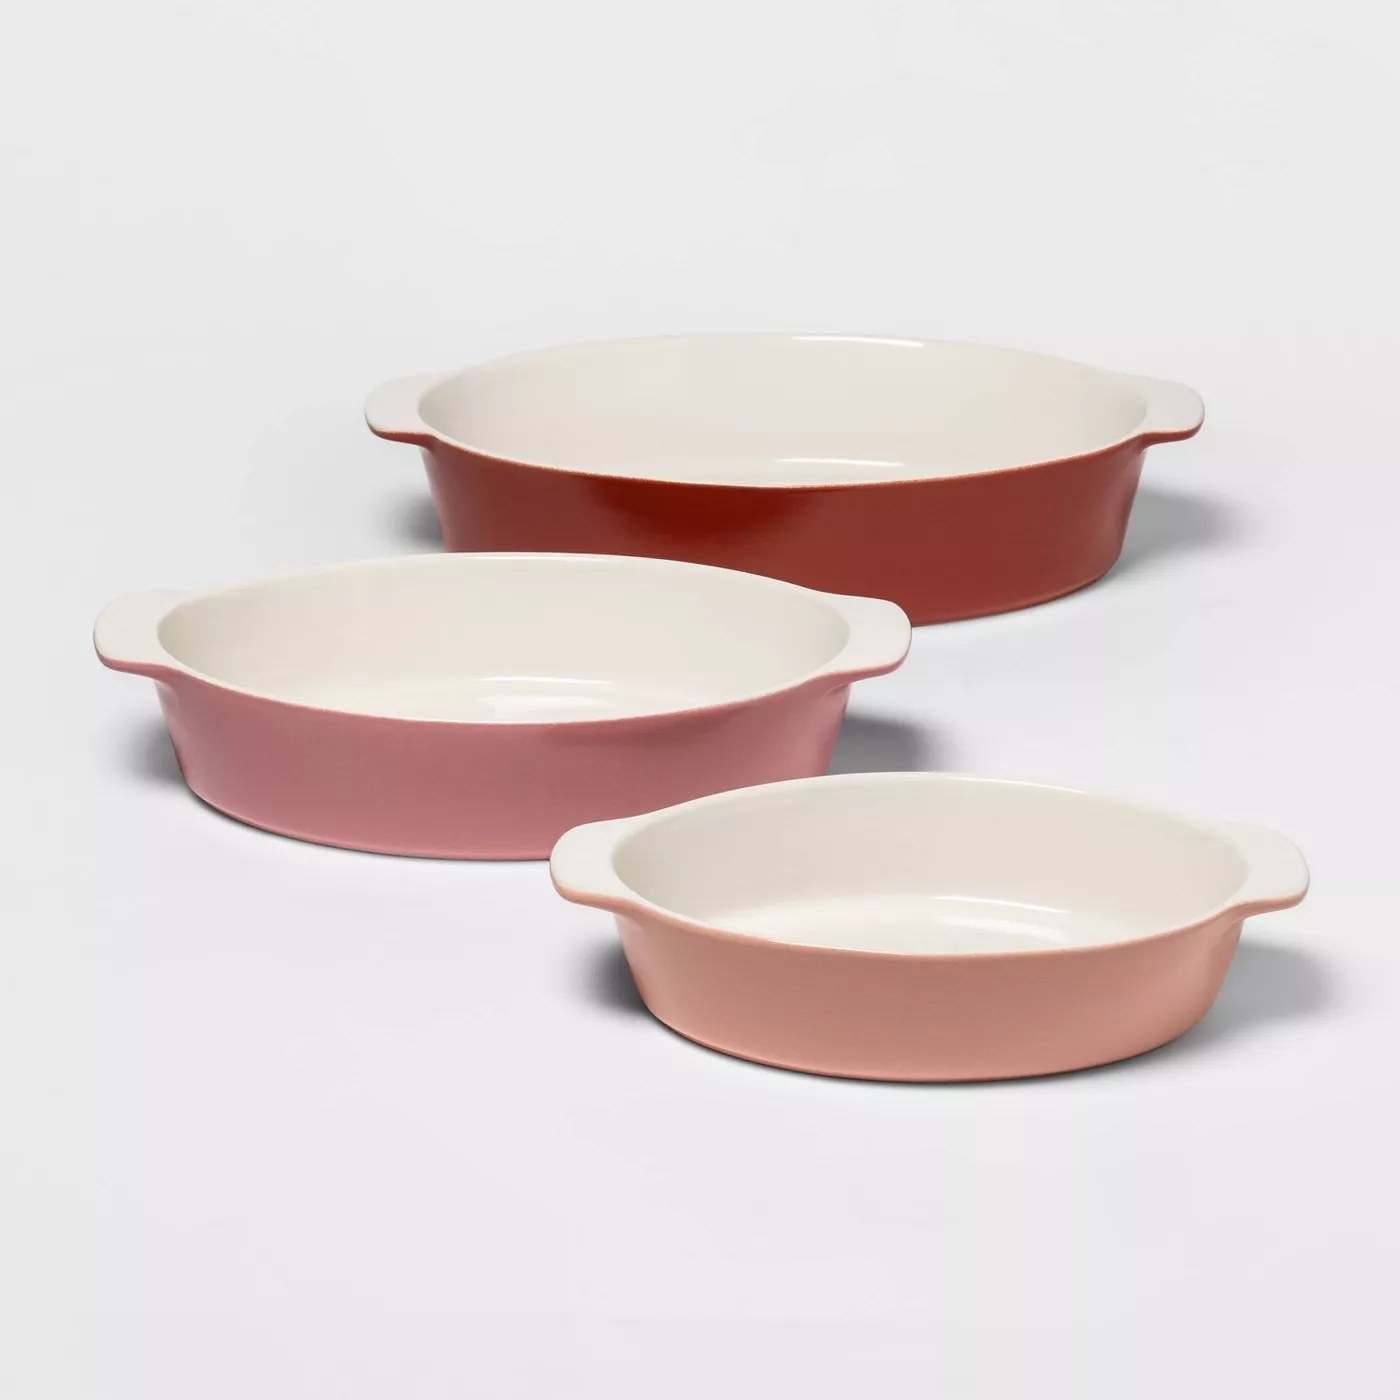 the three pink dishes